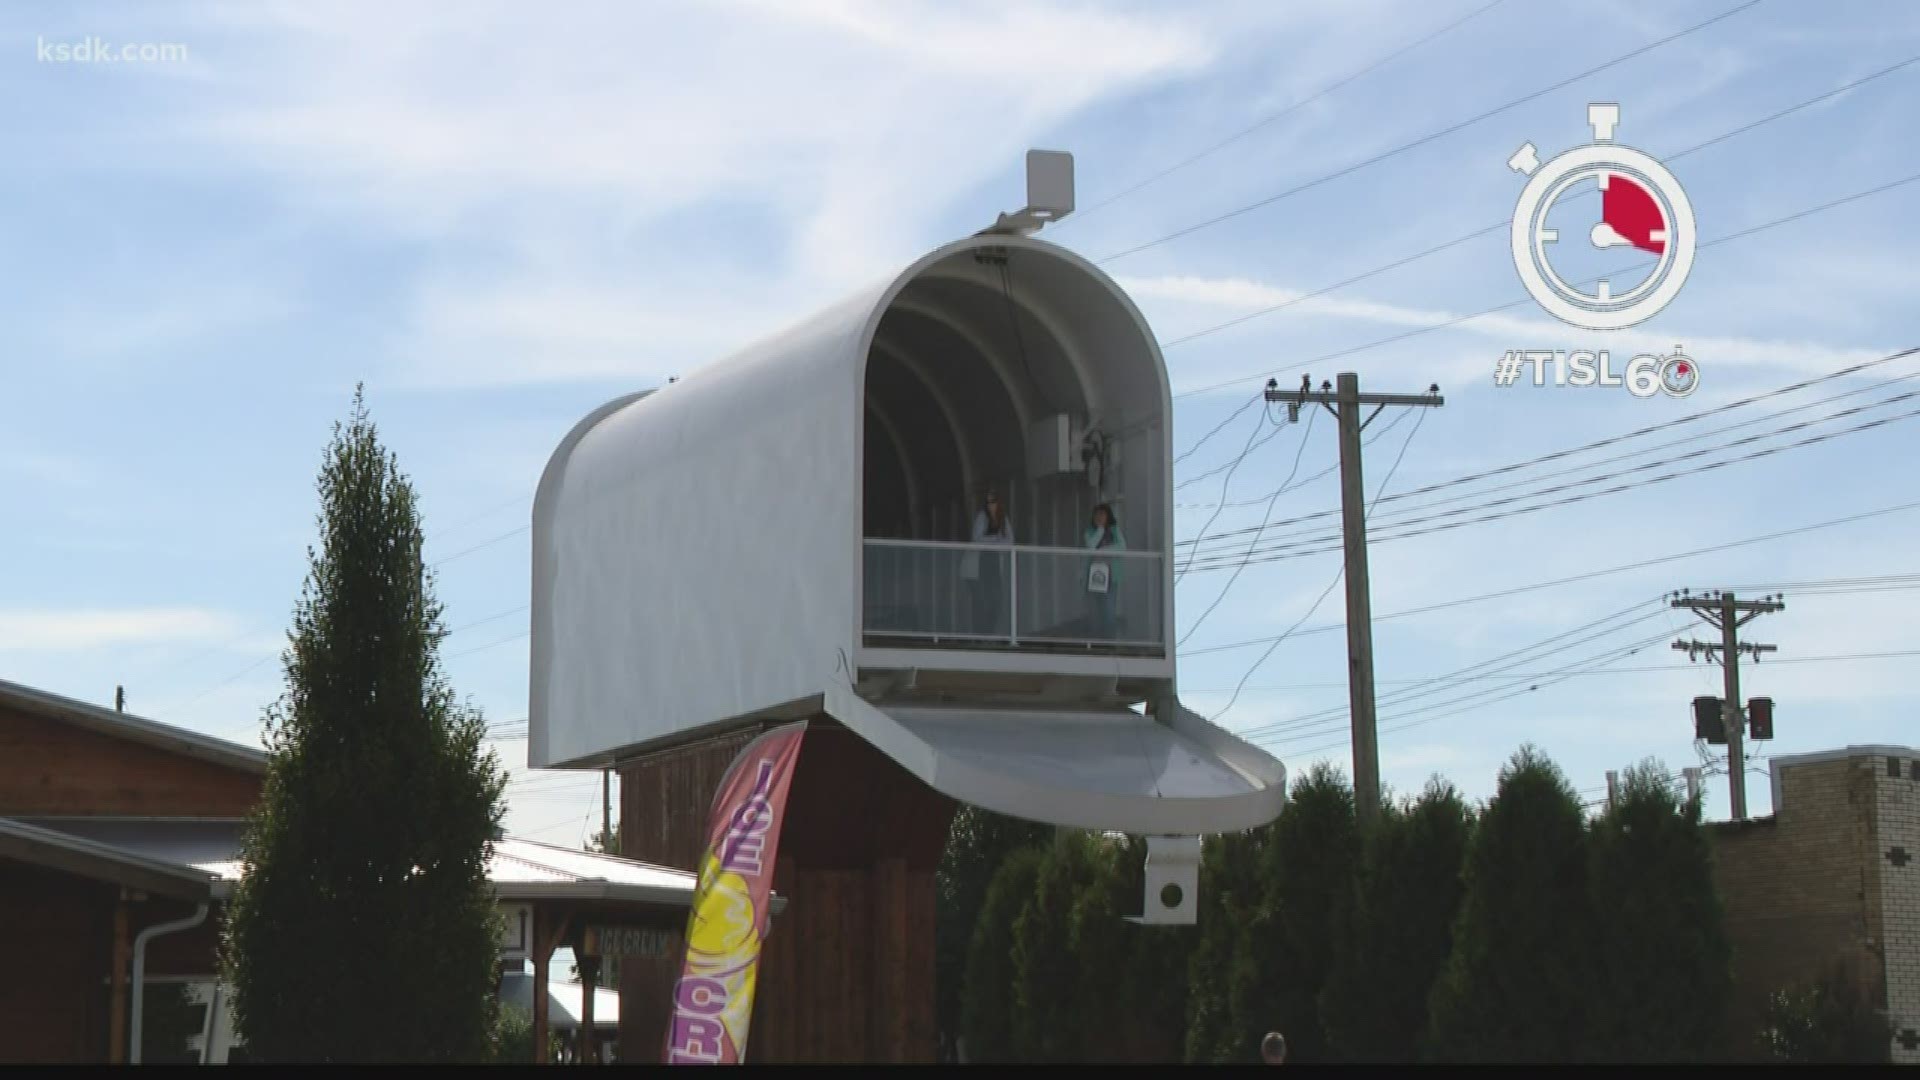 Casey, Illinois, is home to two of the world's largest items, and they're not what you'd expect. Our Randy Schwentker takes us to new heights.